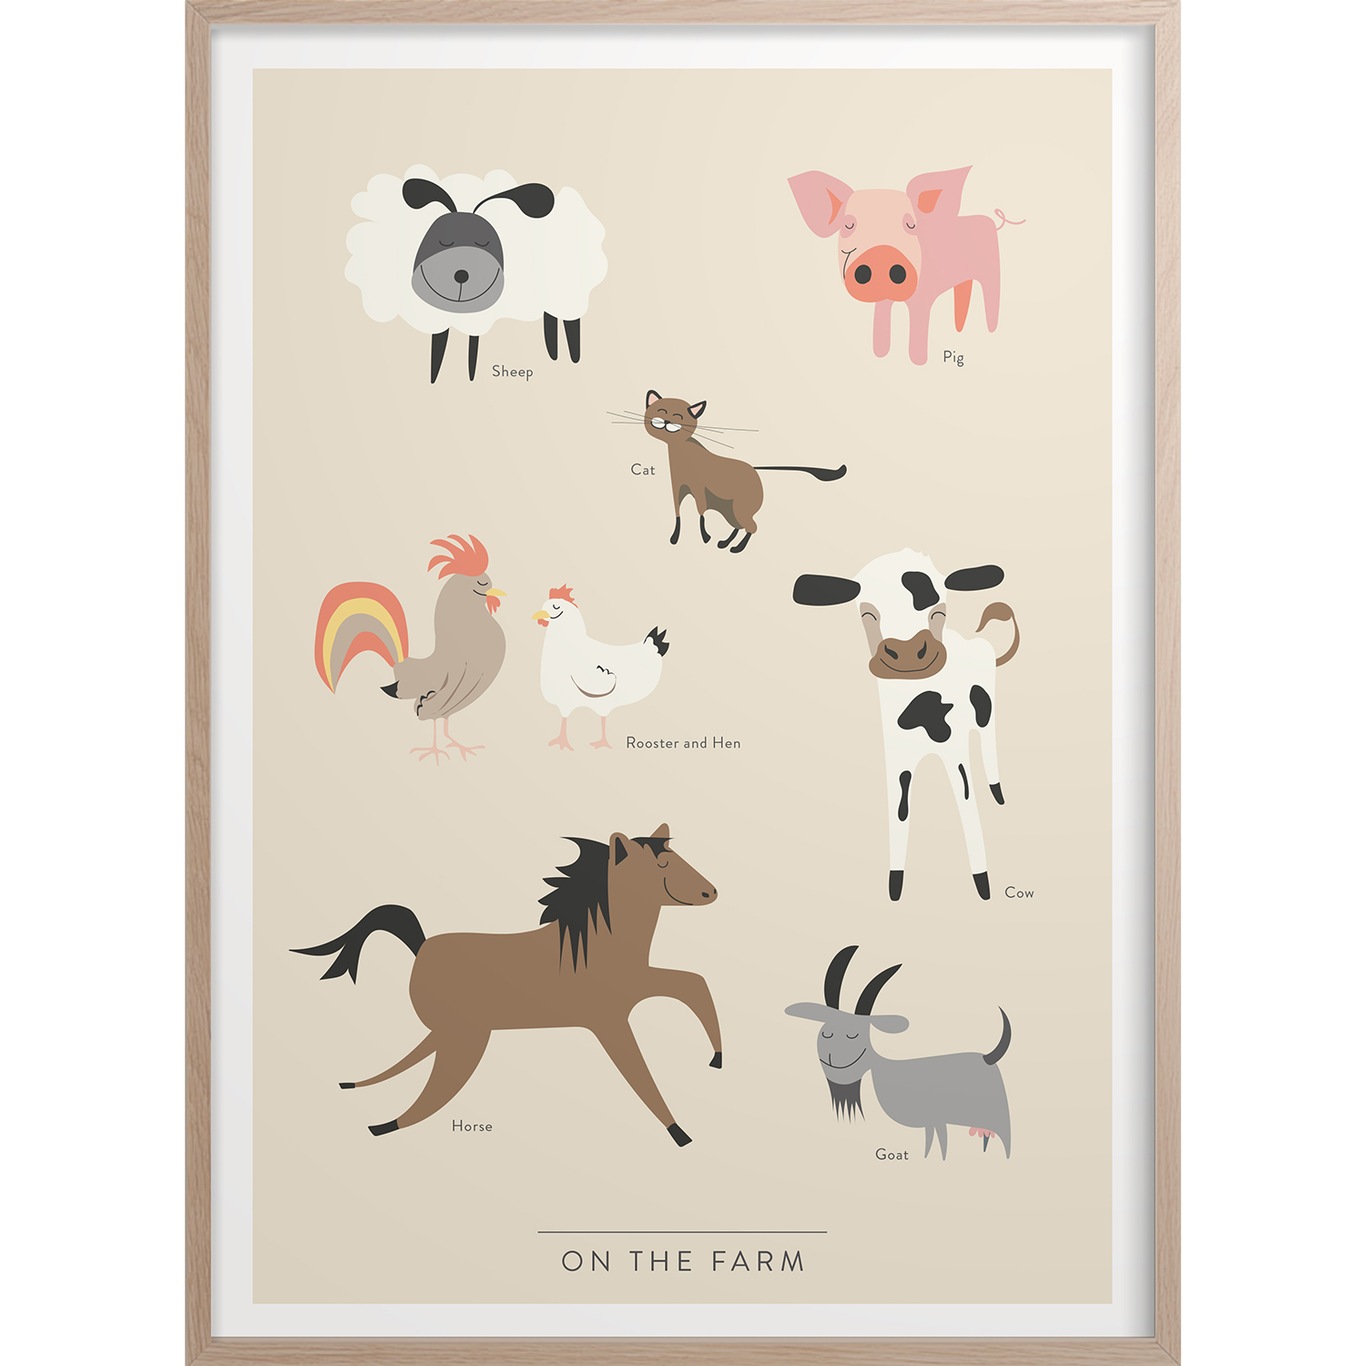 At The Farm Poster 50x70 cm